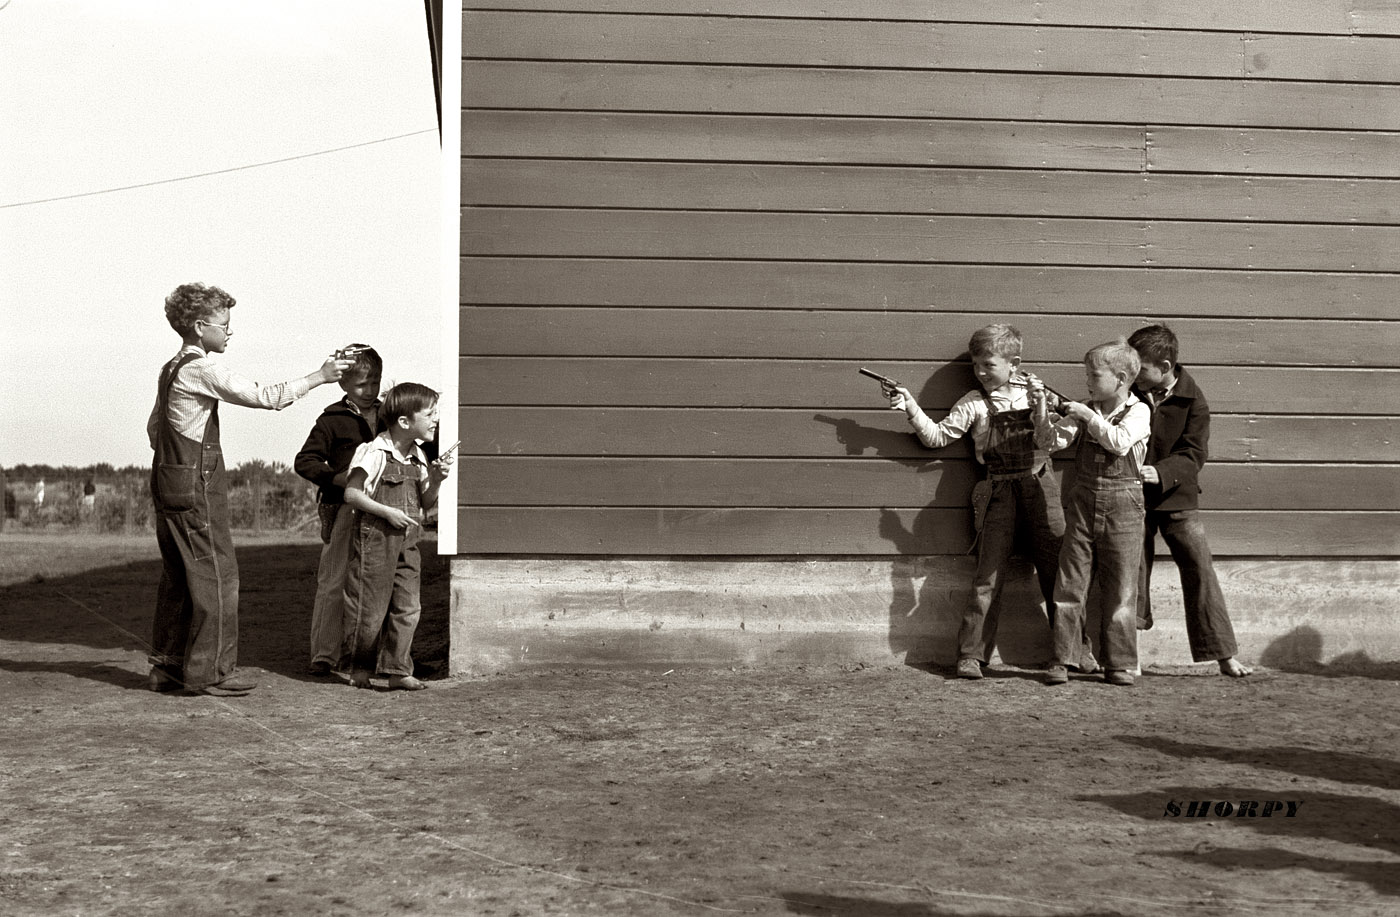 January 1942. "Cowboys and Indians" at the Farm Security Administration camp elementary school in Weslaco, Tex. View full size. Photo by Arthur Rothstein.